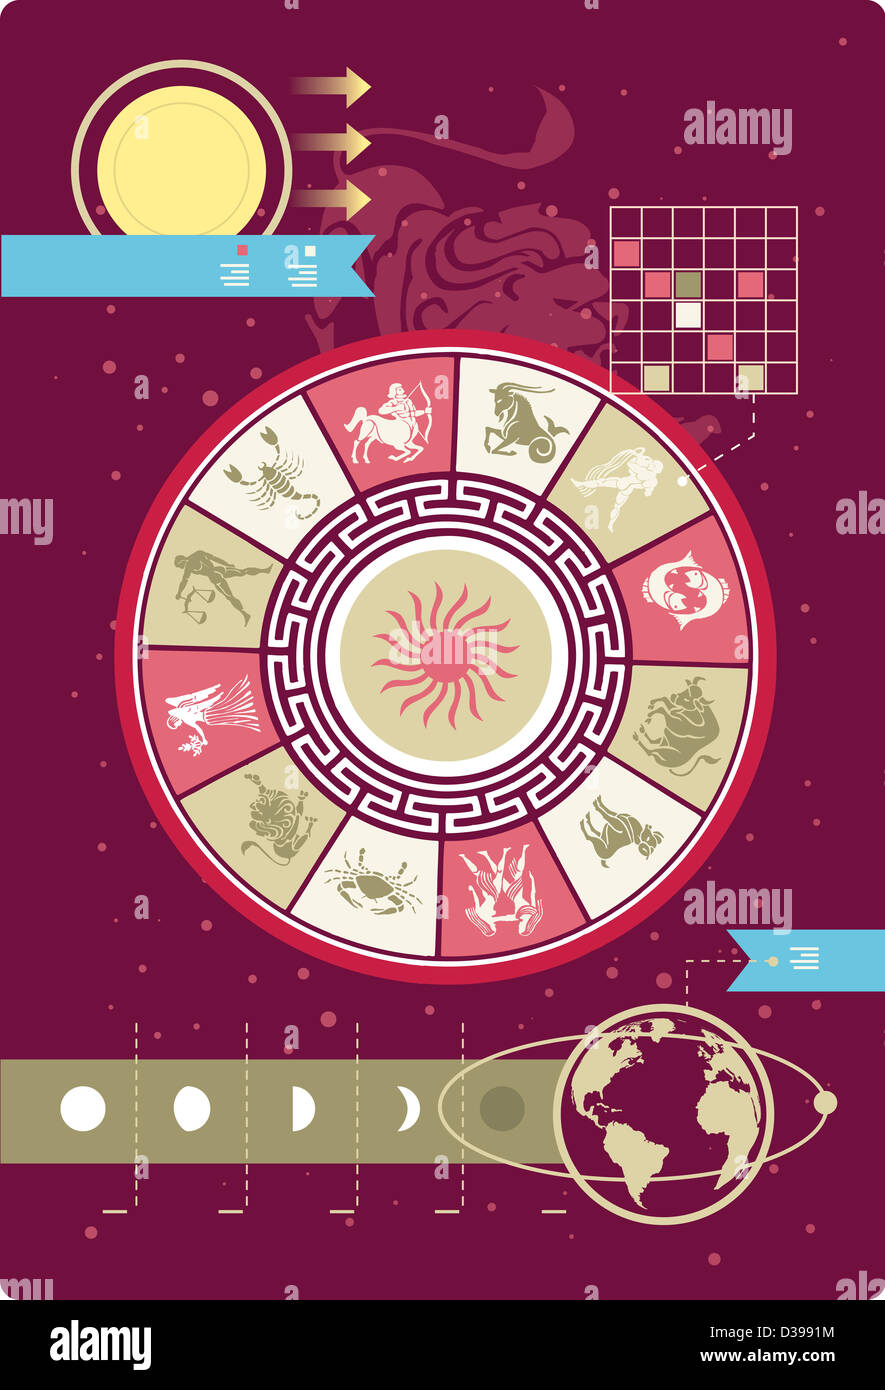 Illustrative image of astrology signs in infographic style Stock Photo